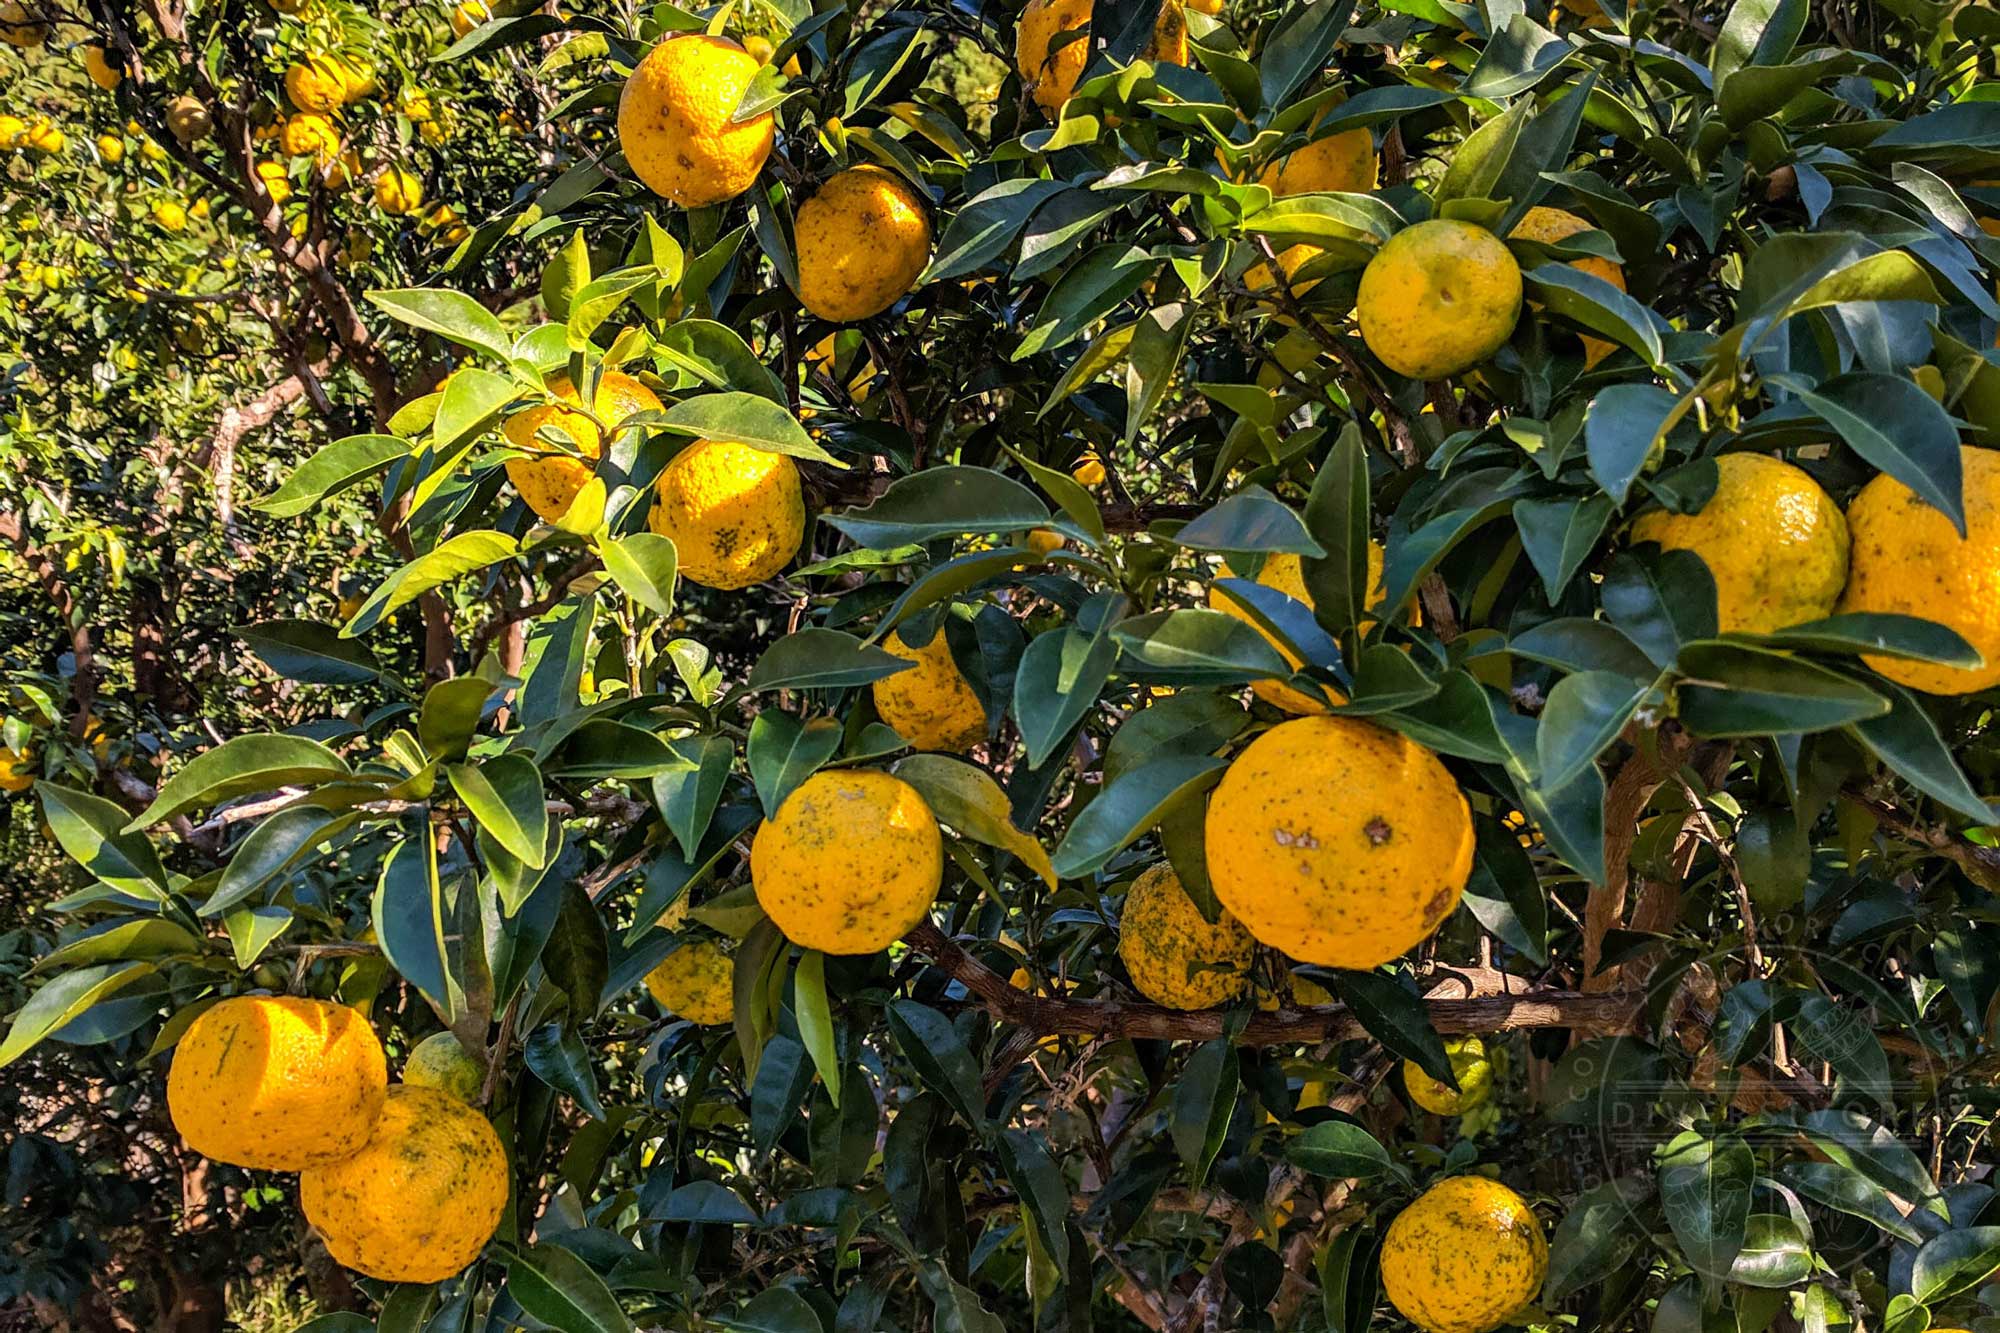 Featured image for “Yuzu – How to Find, Choose, & Use It”